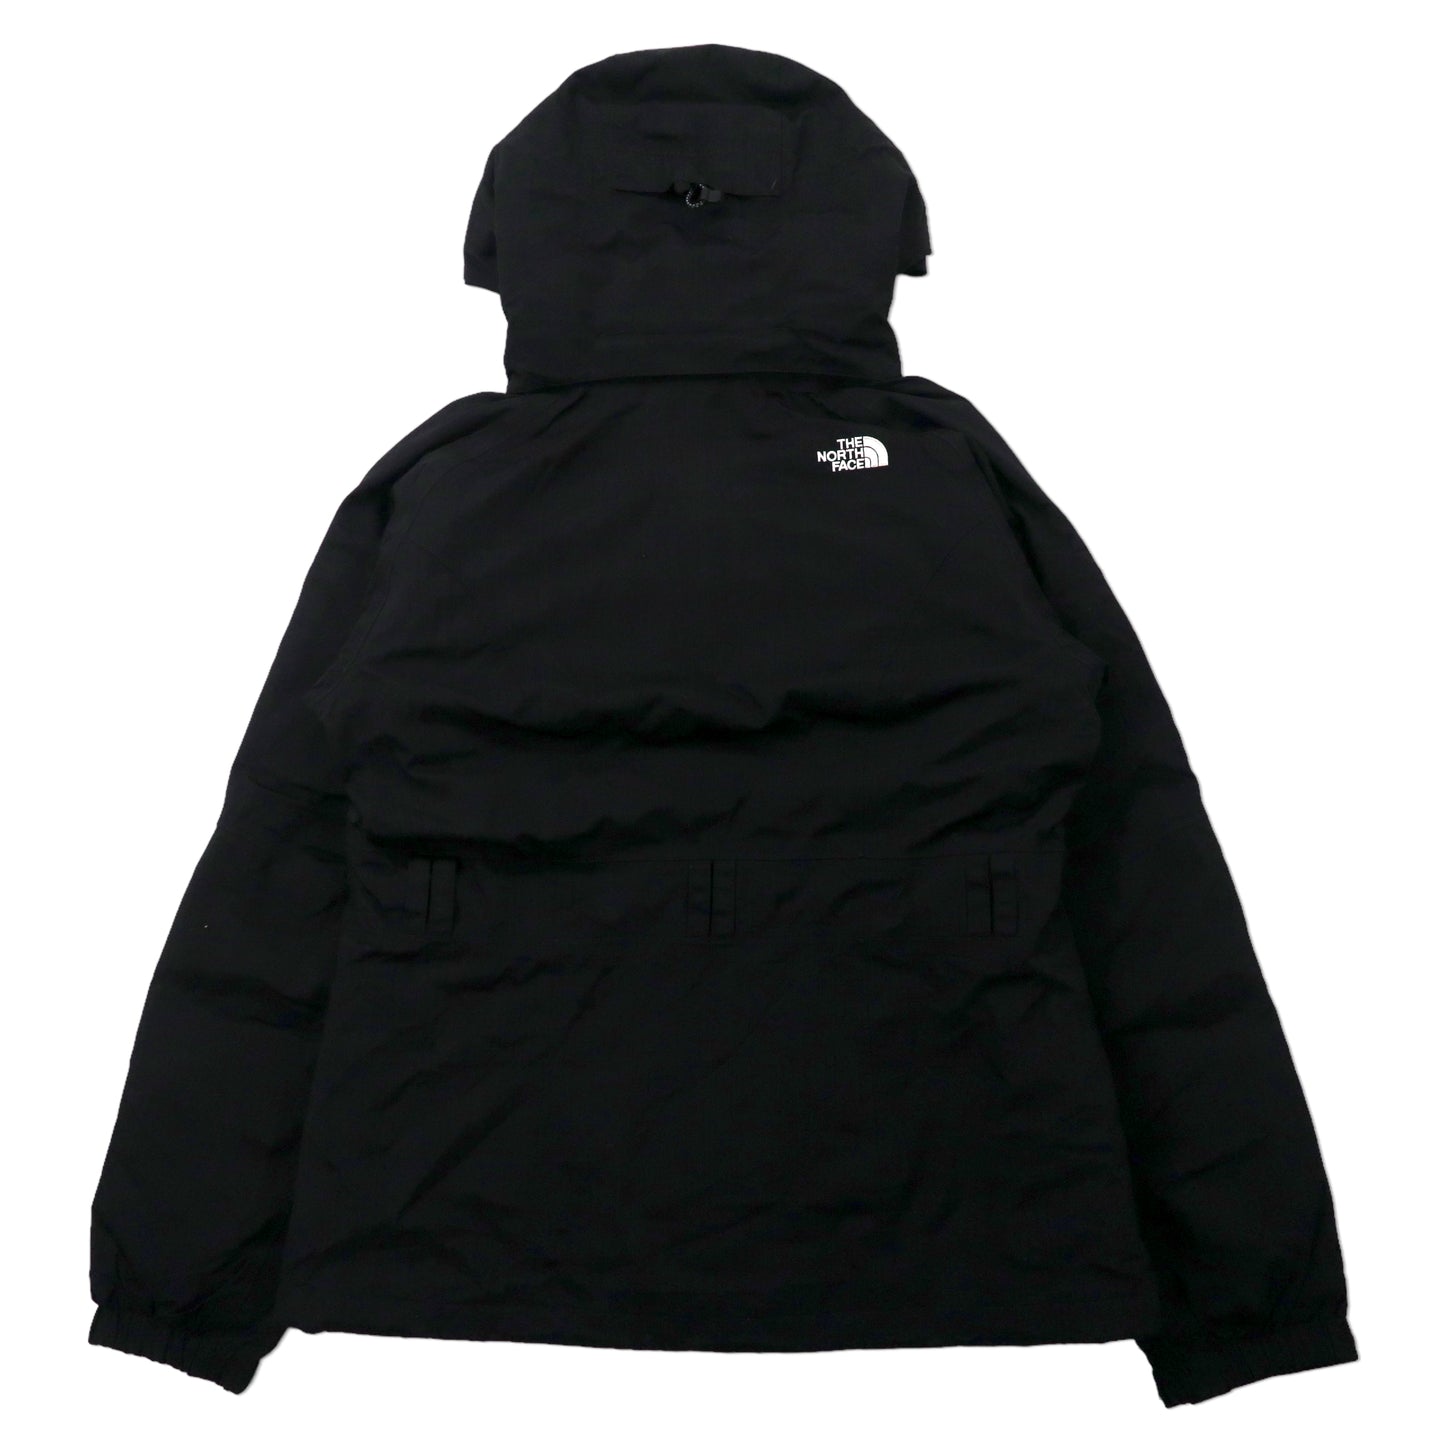 THE NORTH FACE Mountain HOODIE M Black Nylon 550 HYVENT Waterproof 